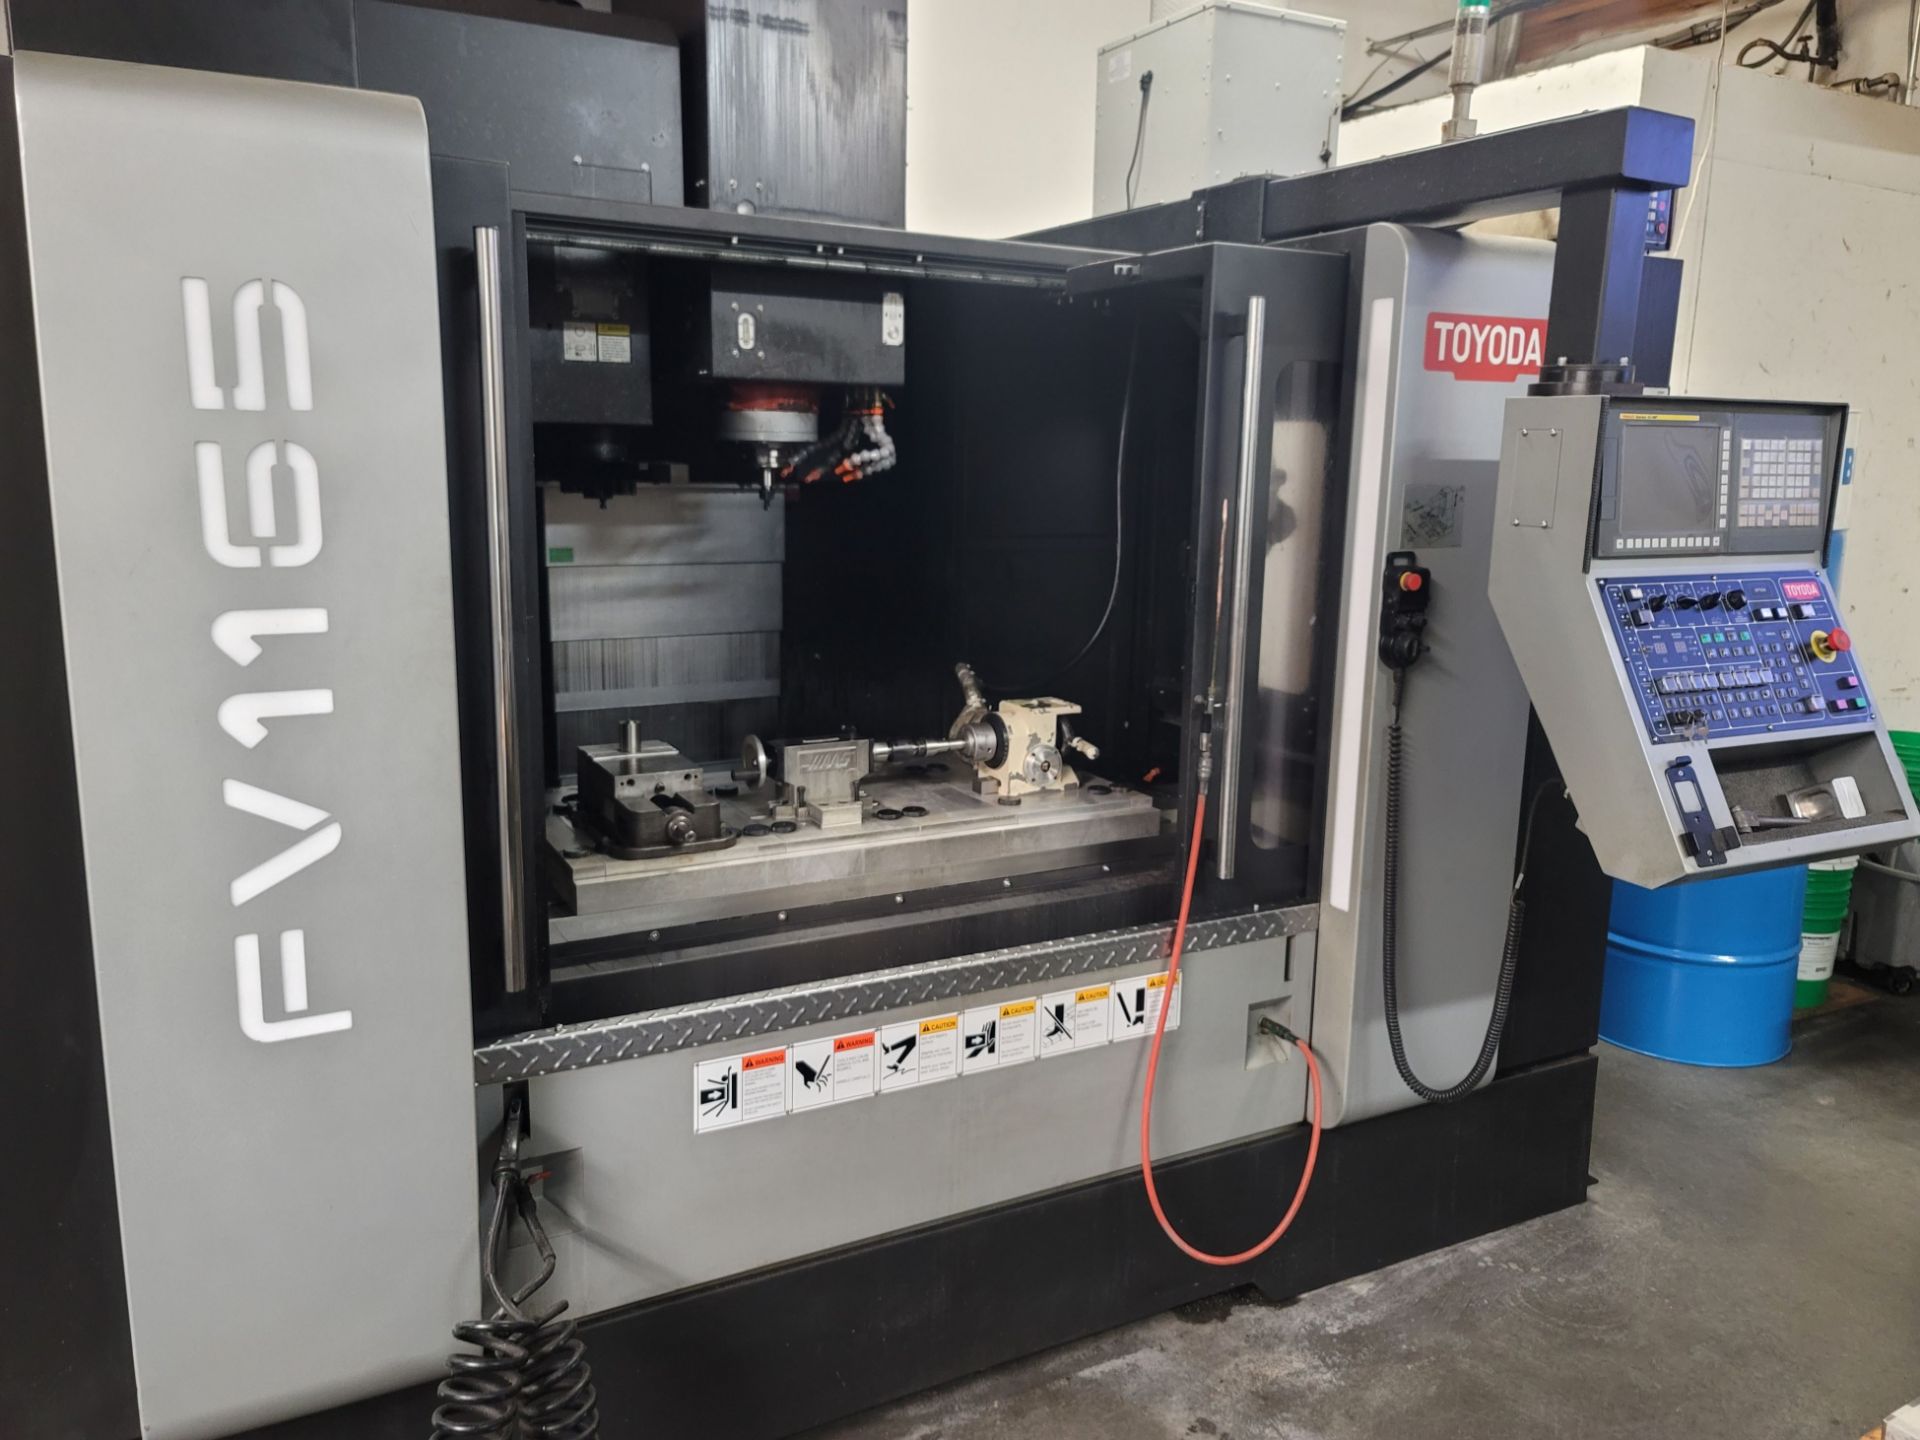 2018 TOYODA FV1165 VERTICAL MACHINING CENTER, FANUC OI-MF SERIES CNC CONTROL, 6000 RPM SPINDLE - Image 3 of 13